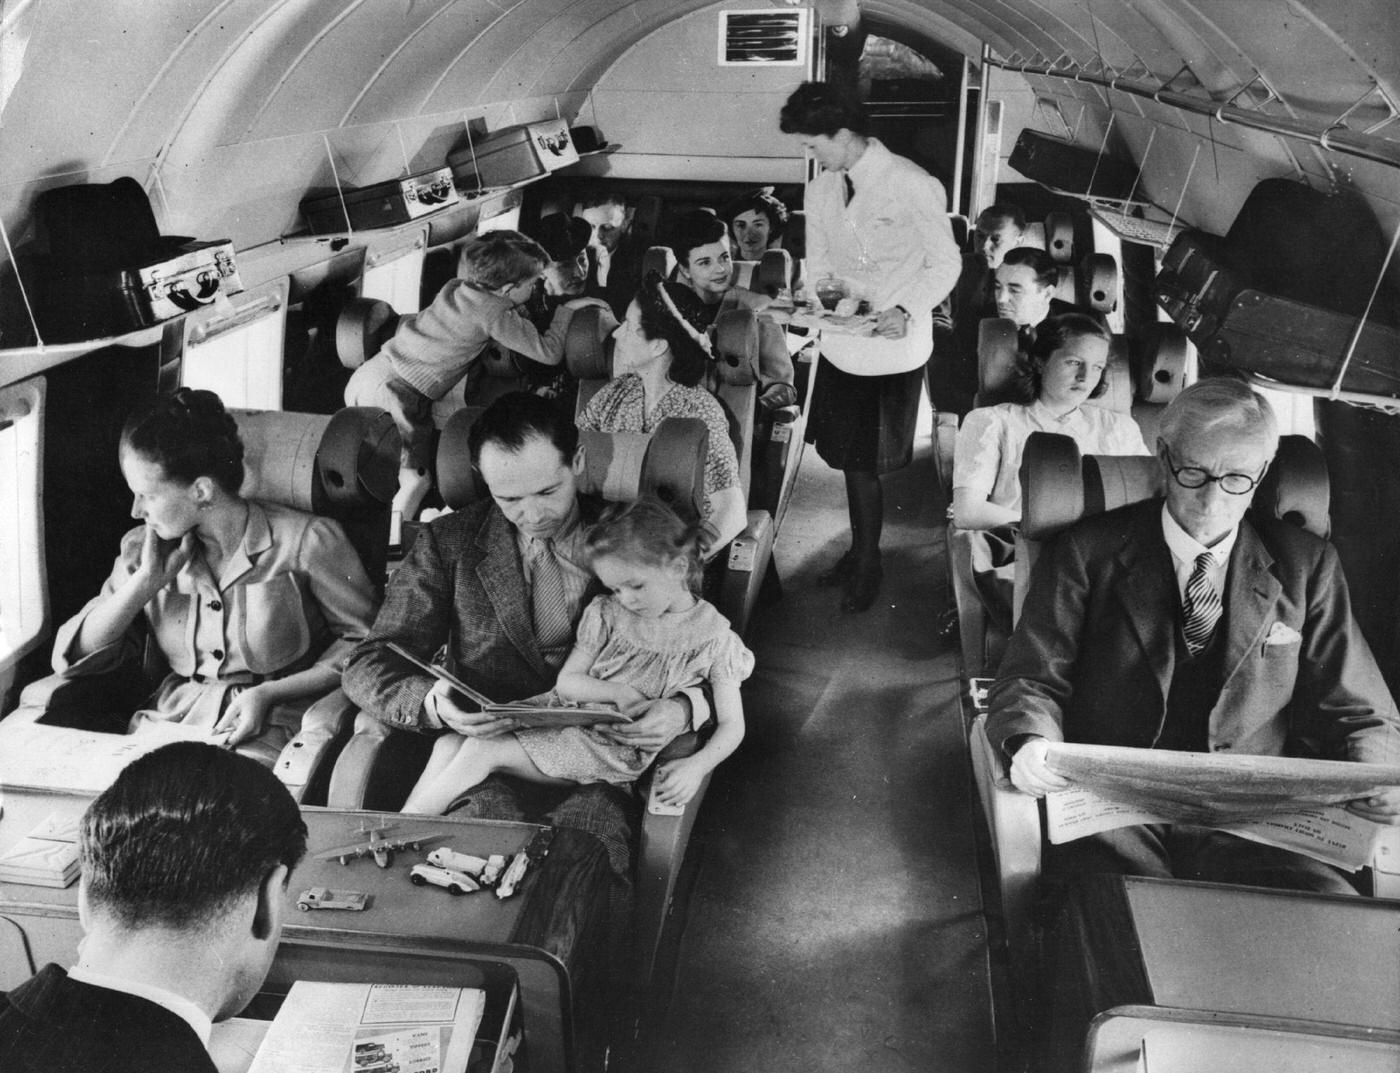 Interior of a BEA Vickers airplane showing the passenger section; a stewardess is about to serve lunch. 1960.